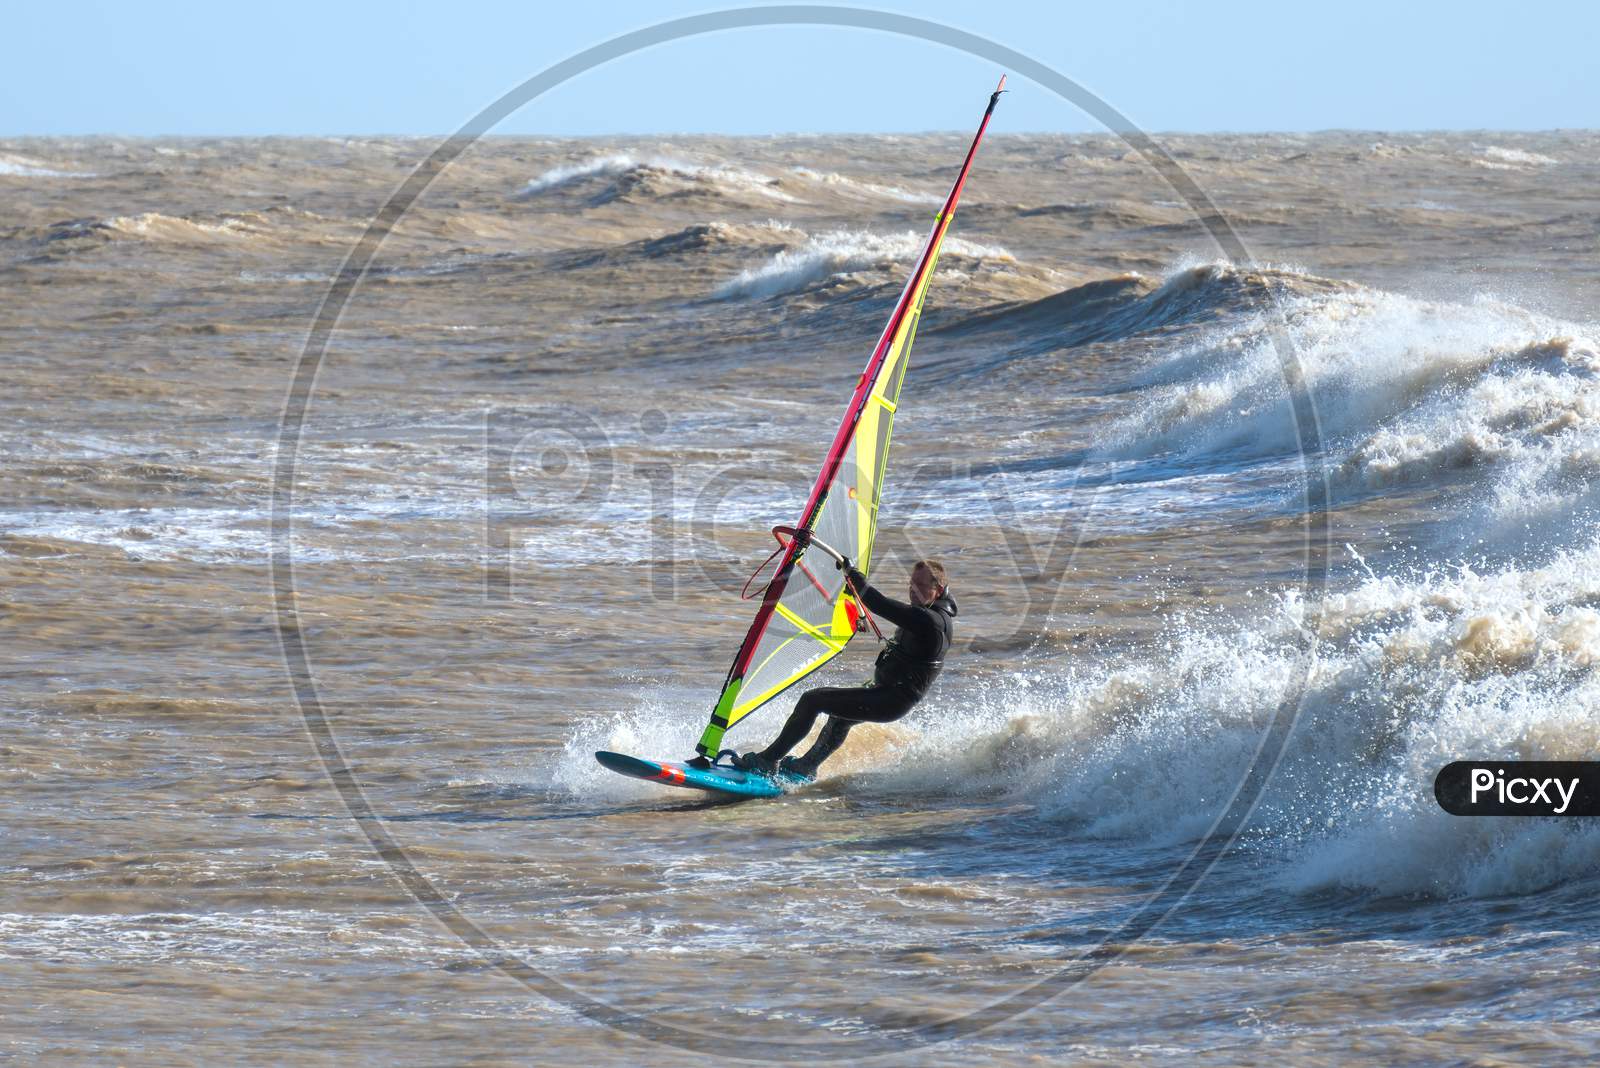 Goring-By-Sea, West Sussex/Uk - January 28 : Windsurfer At Goring-By-Sea In West Sussex On January 28, 2020. Unidentified Person